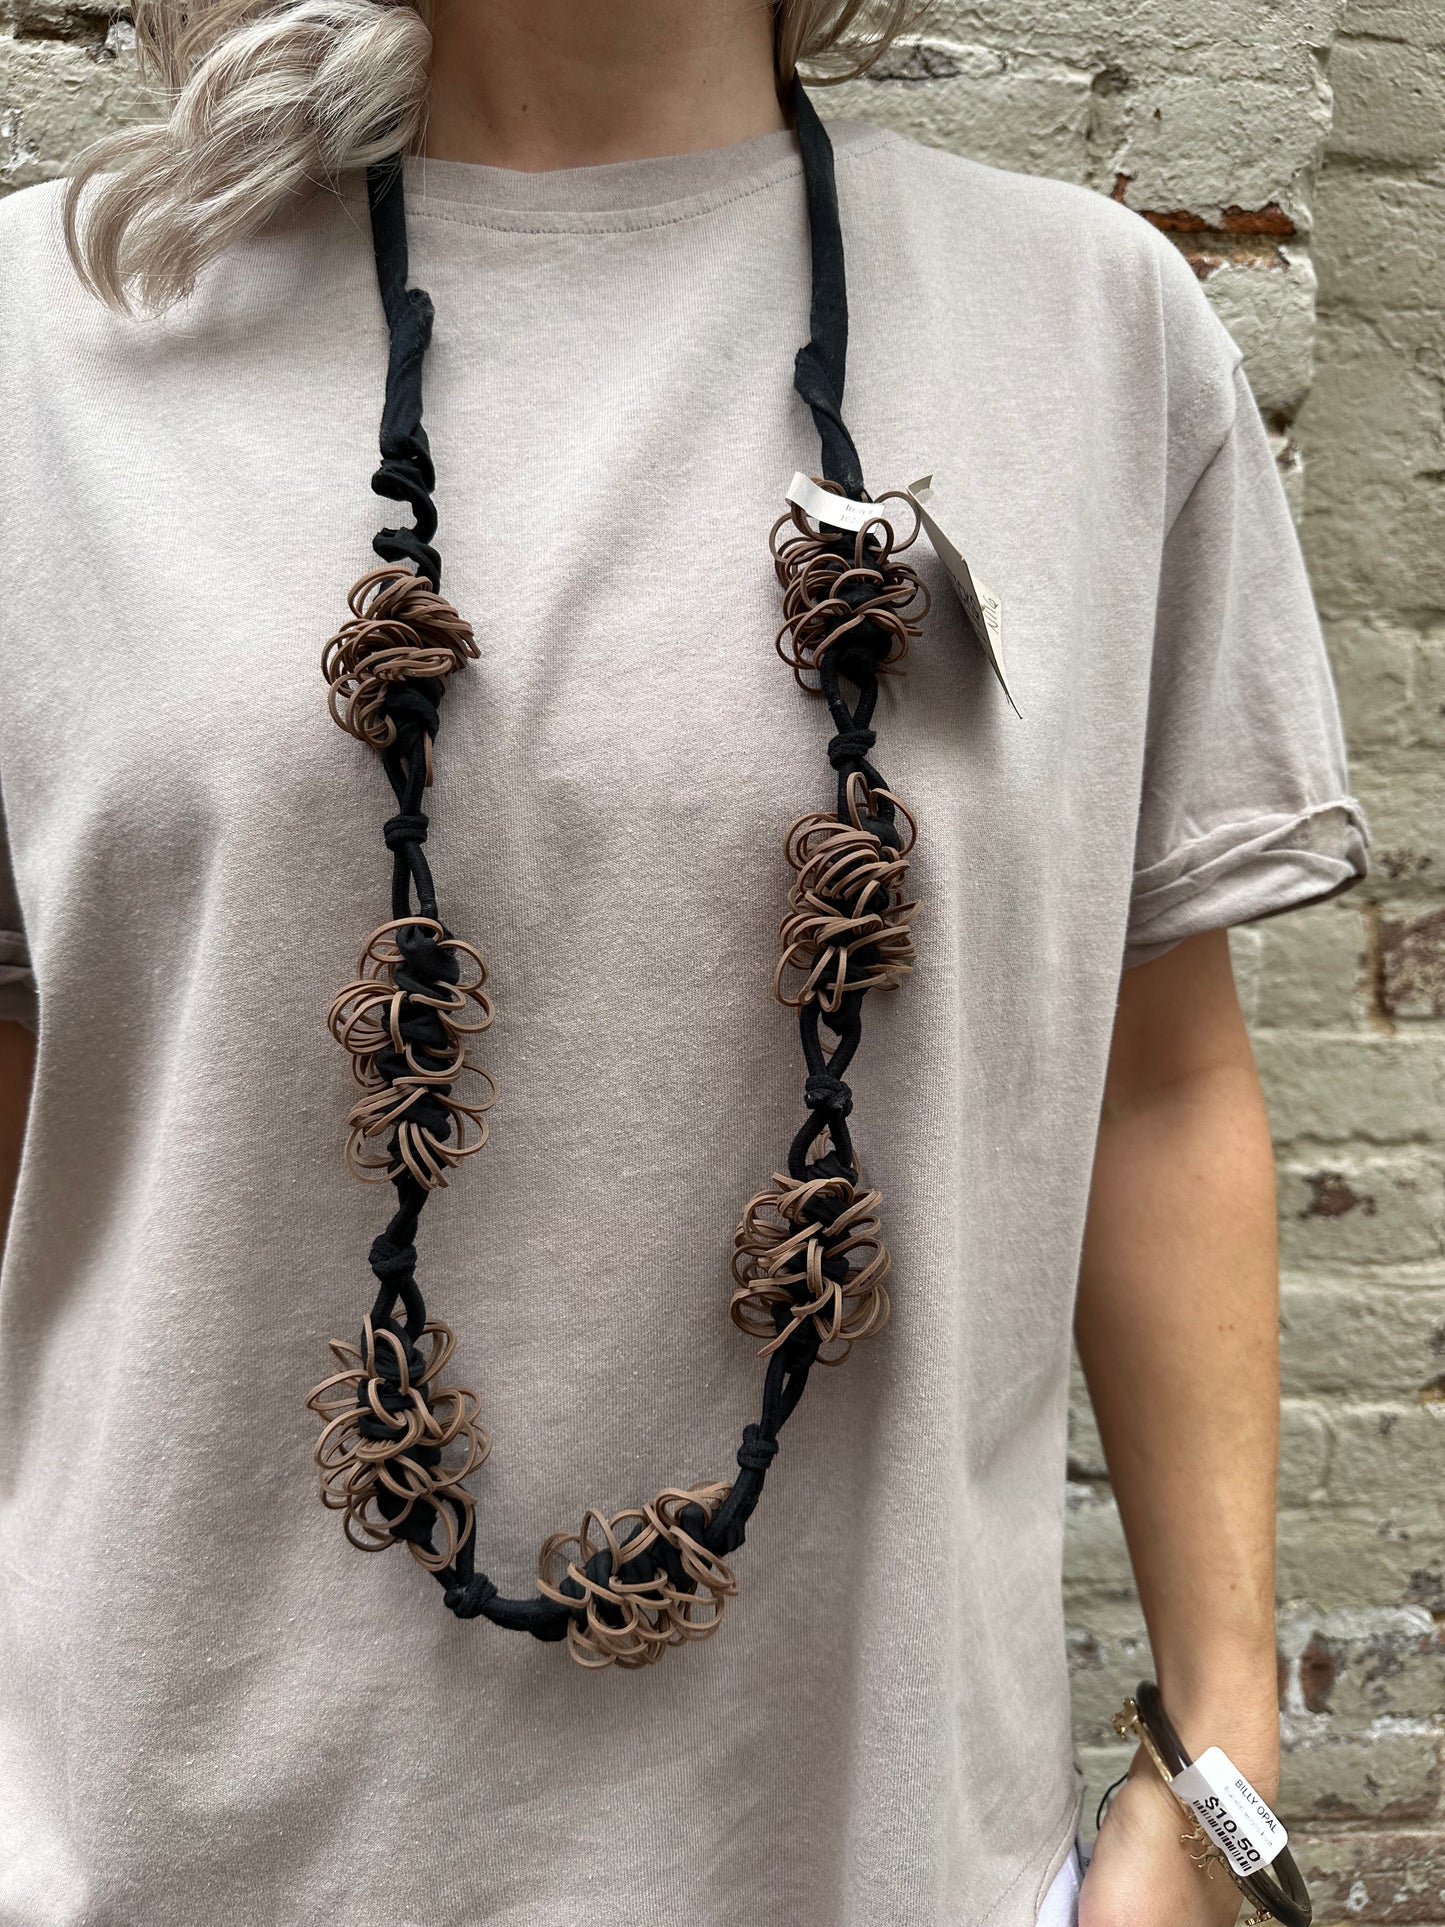 Fabric Necklace